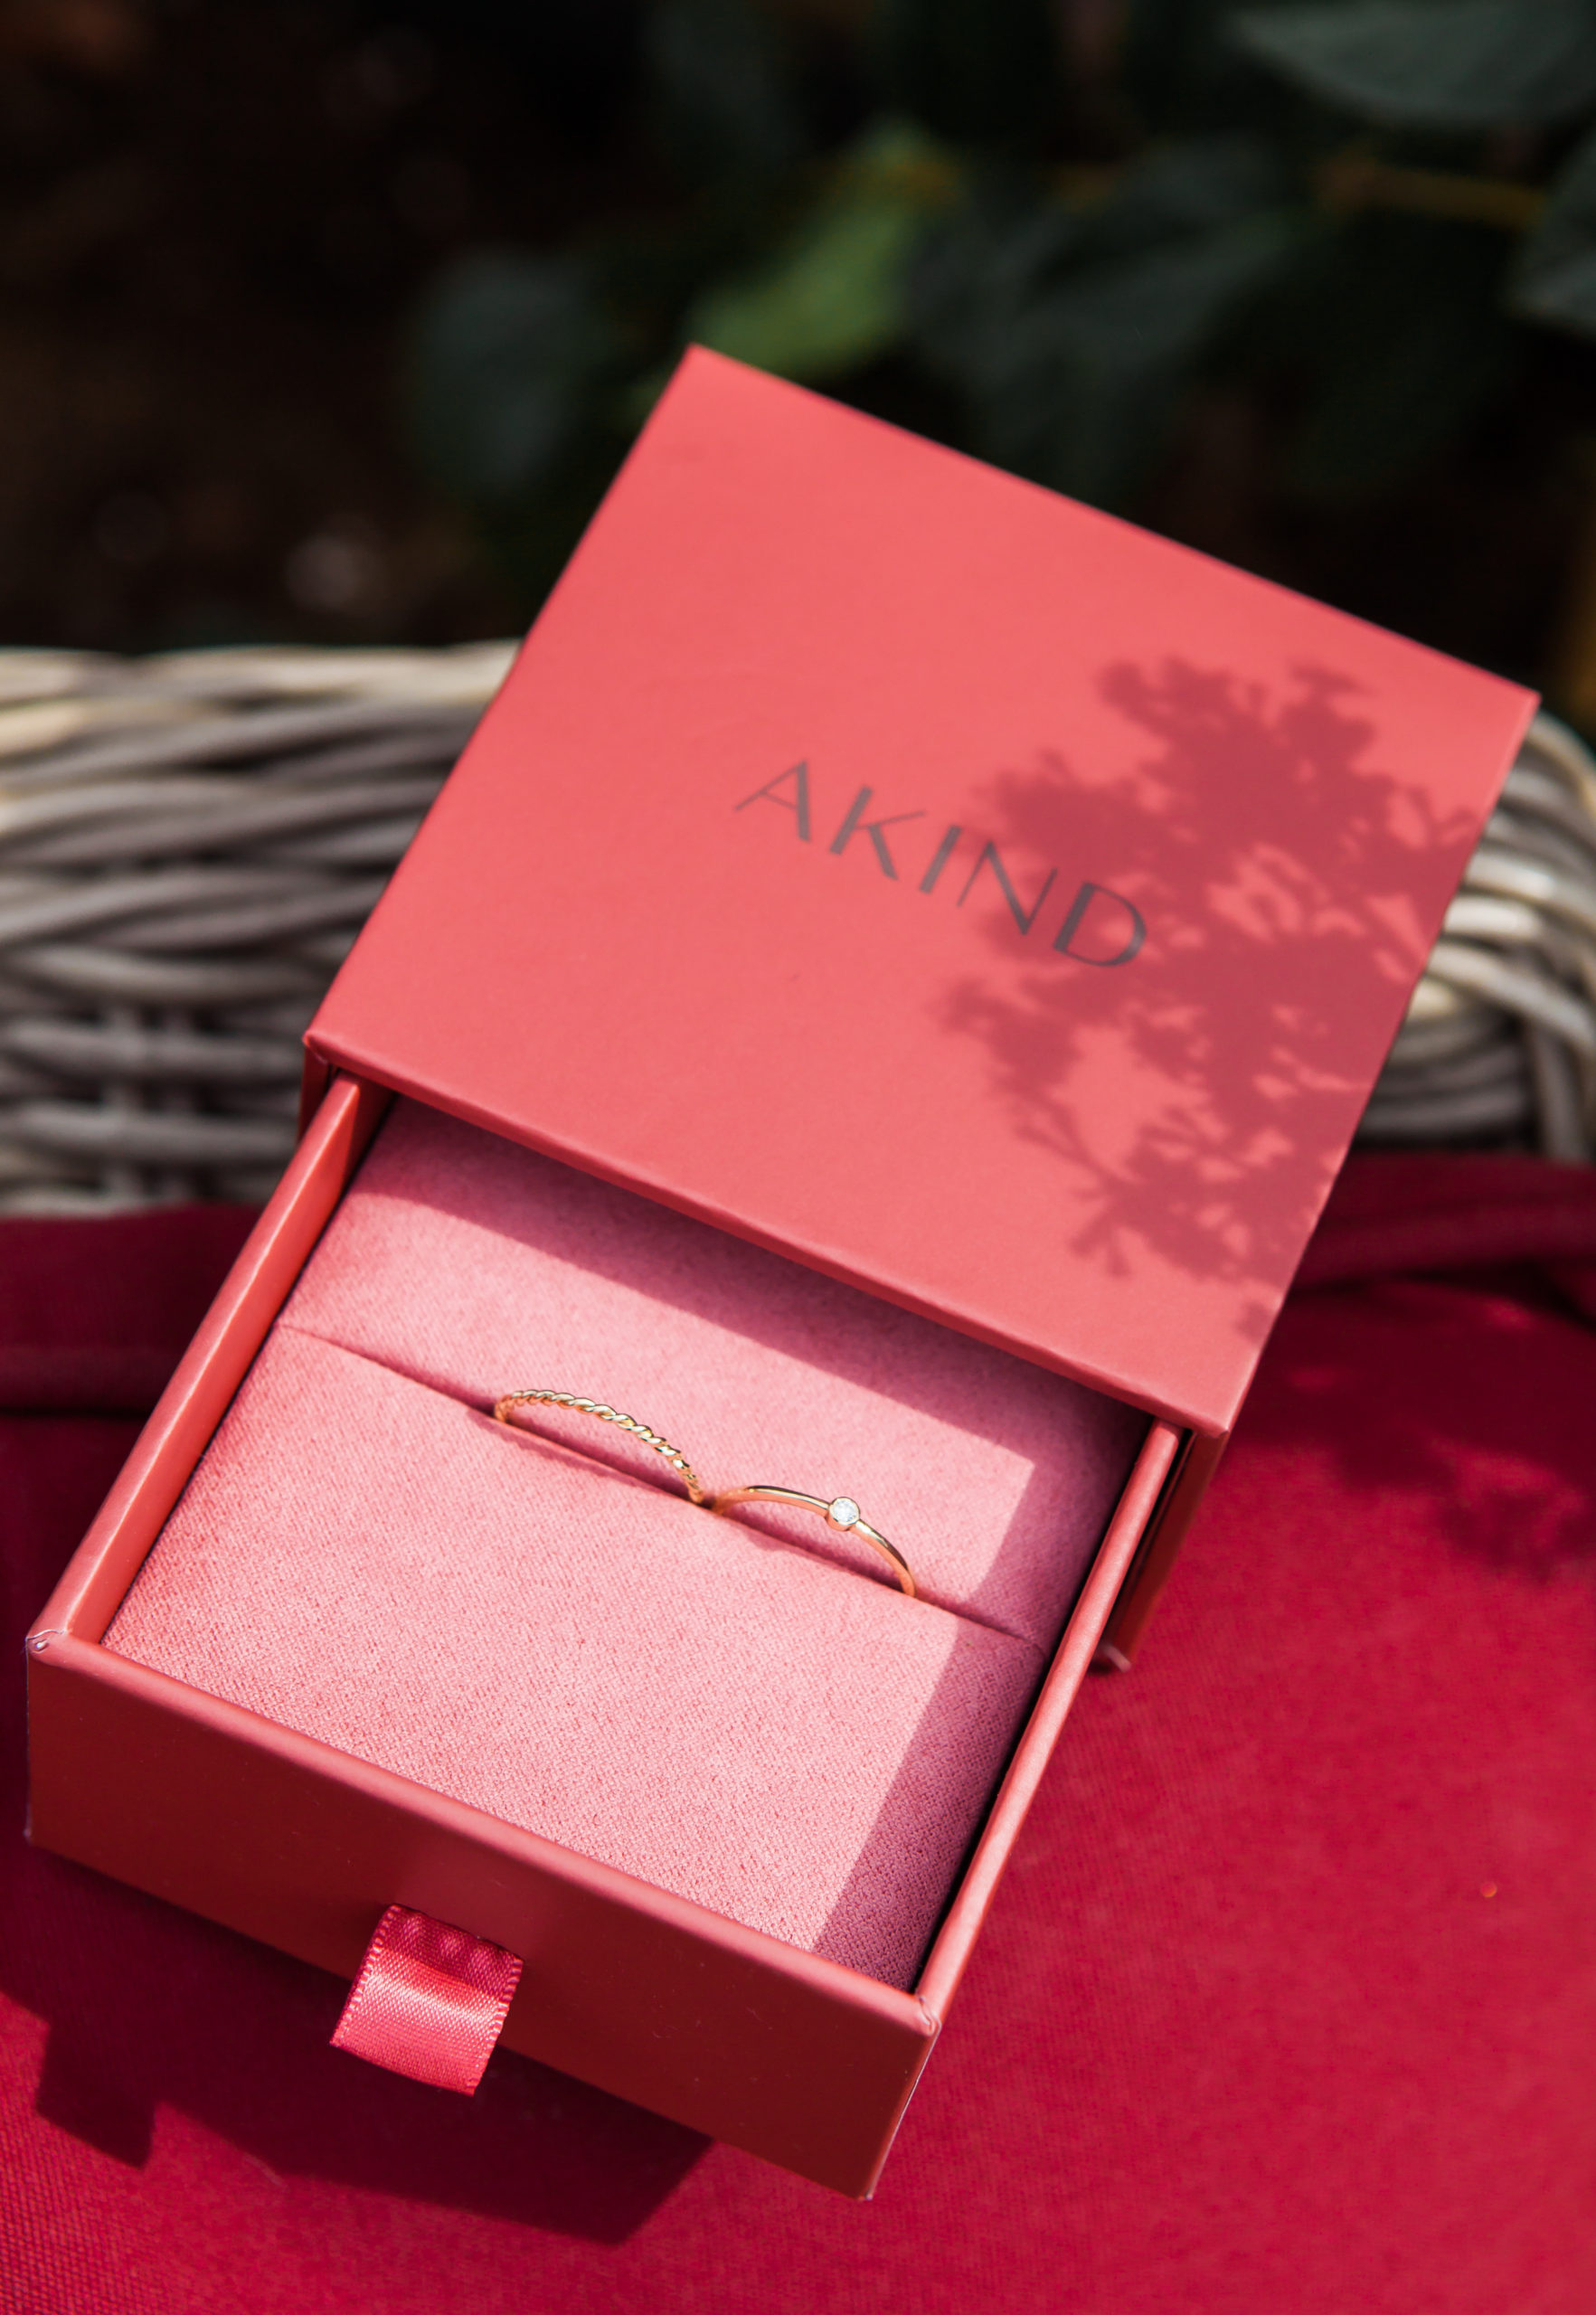 AKIND jewelry rings